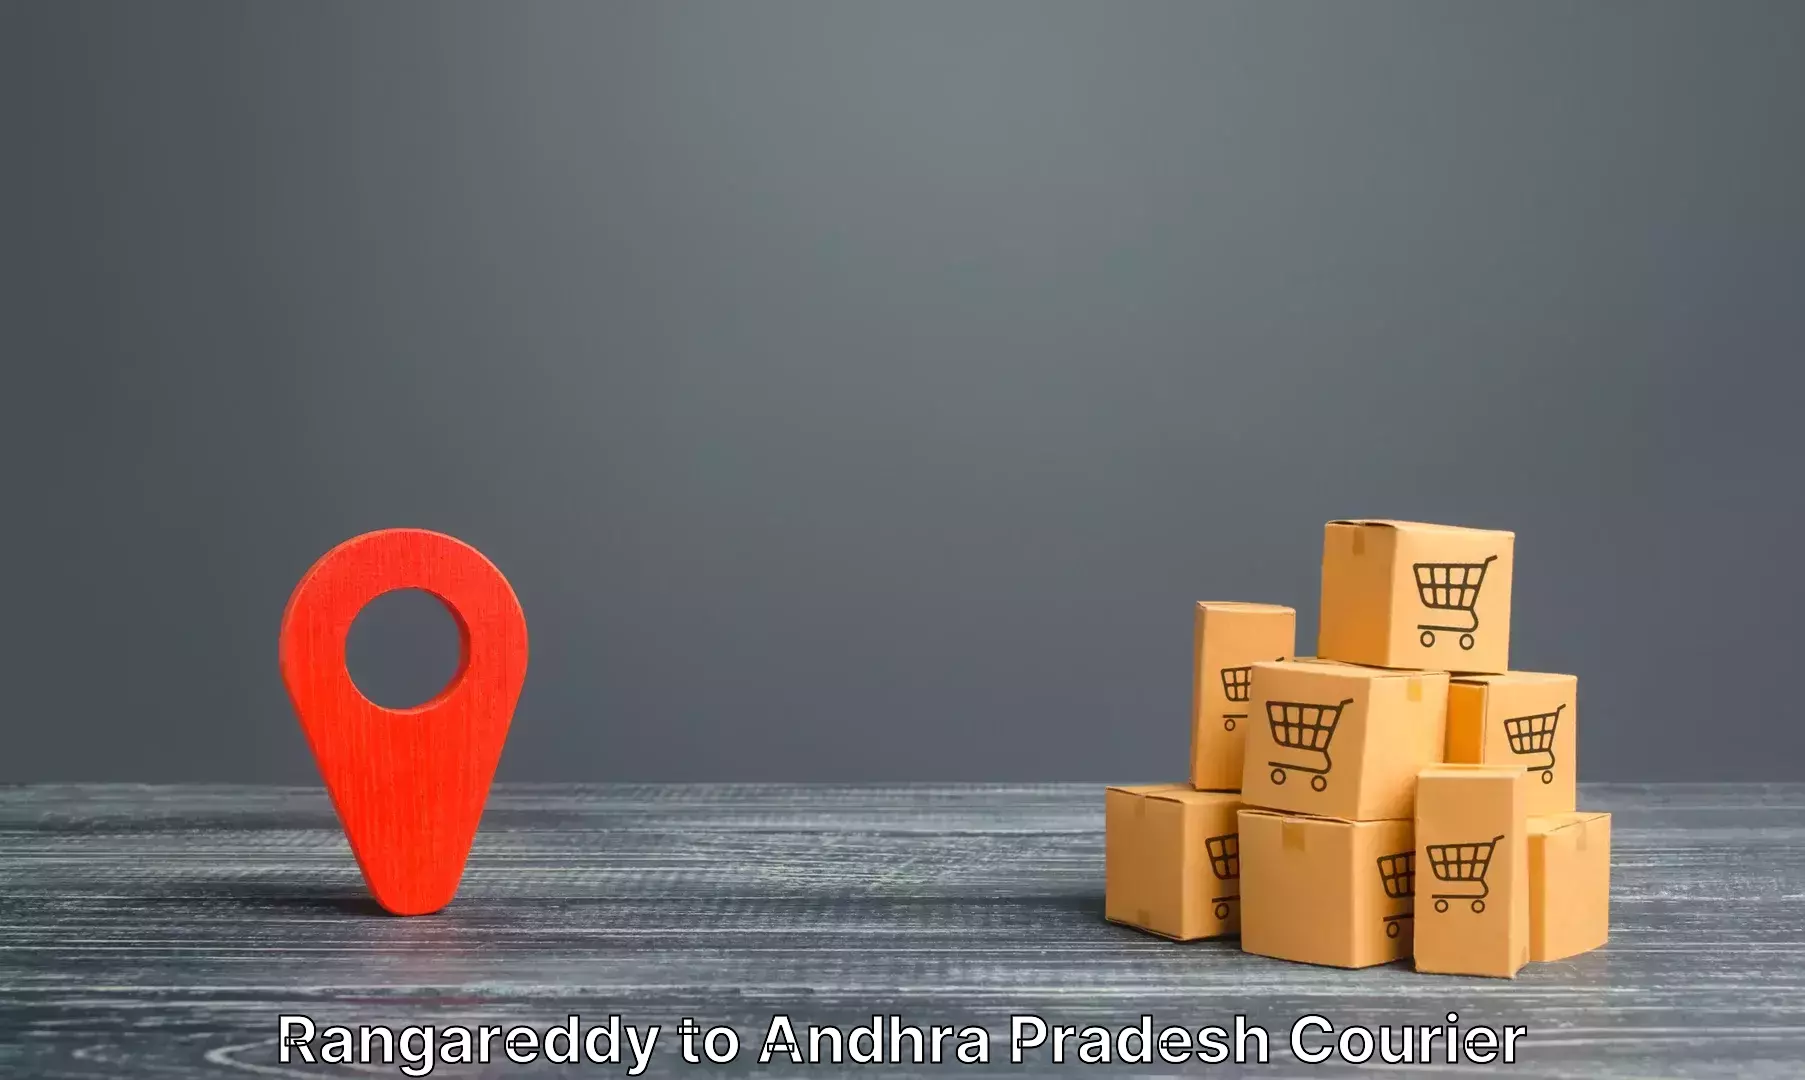 Baggage shipping experience in Rangareddy to Visakhapatnam Port